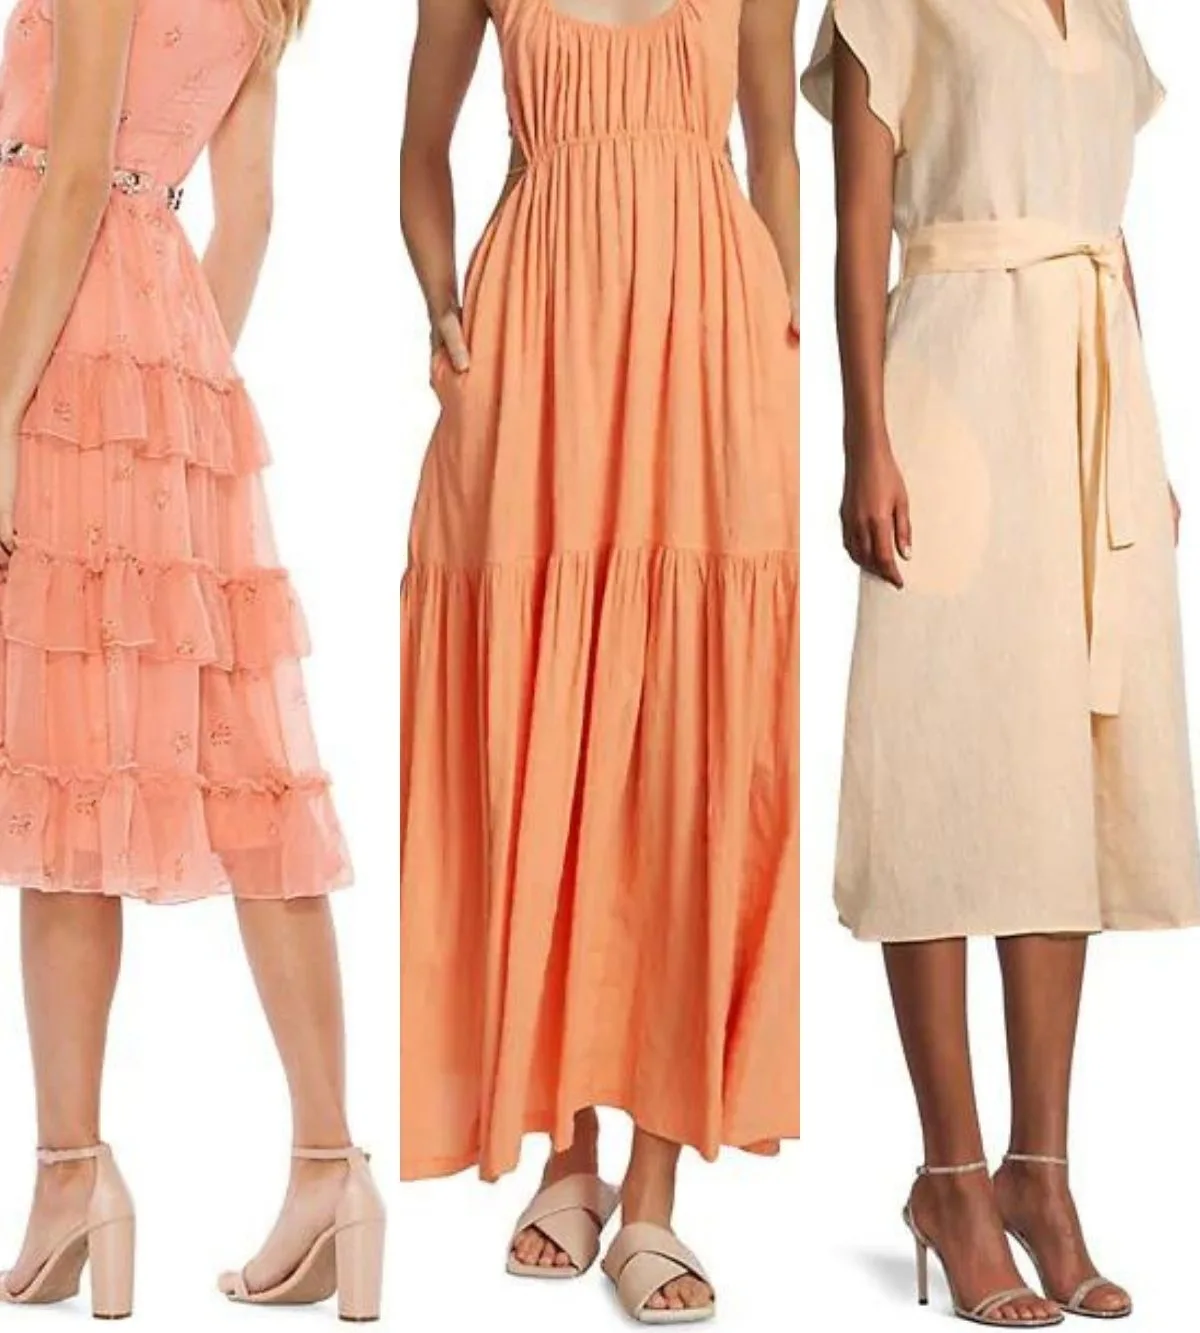 3 women wearing different beige and nude color shoes with peach dress outfits.